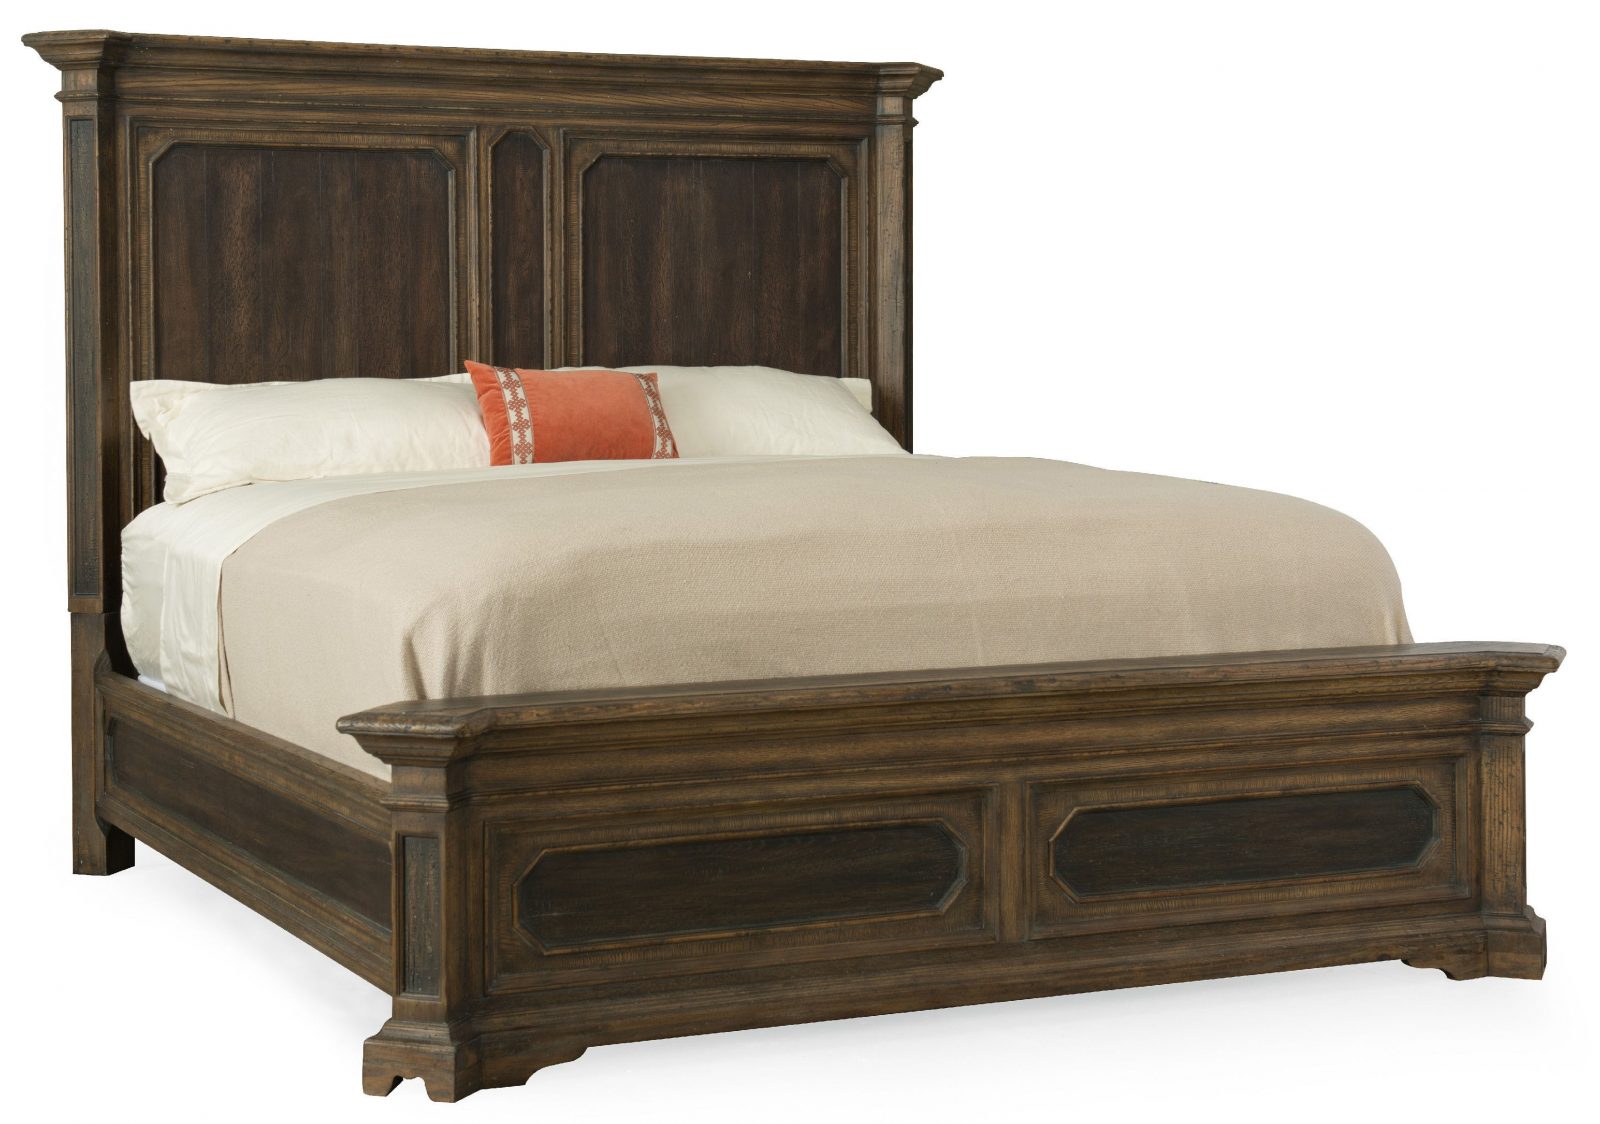 Hill Country Woodcreek Mansion bed